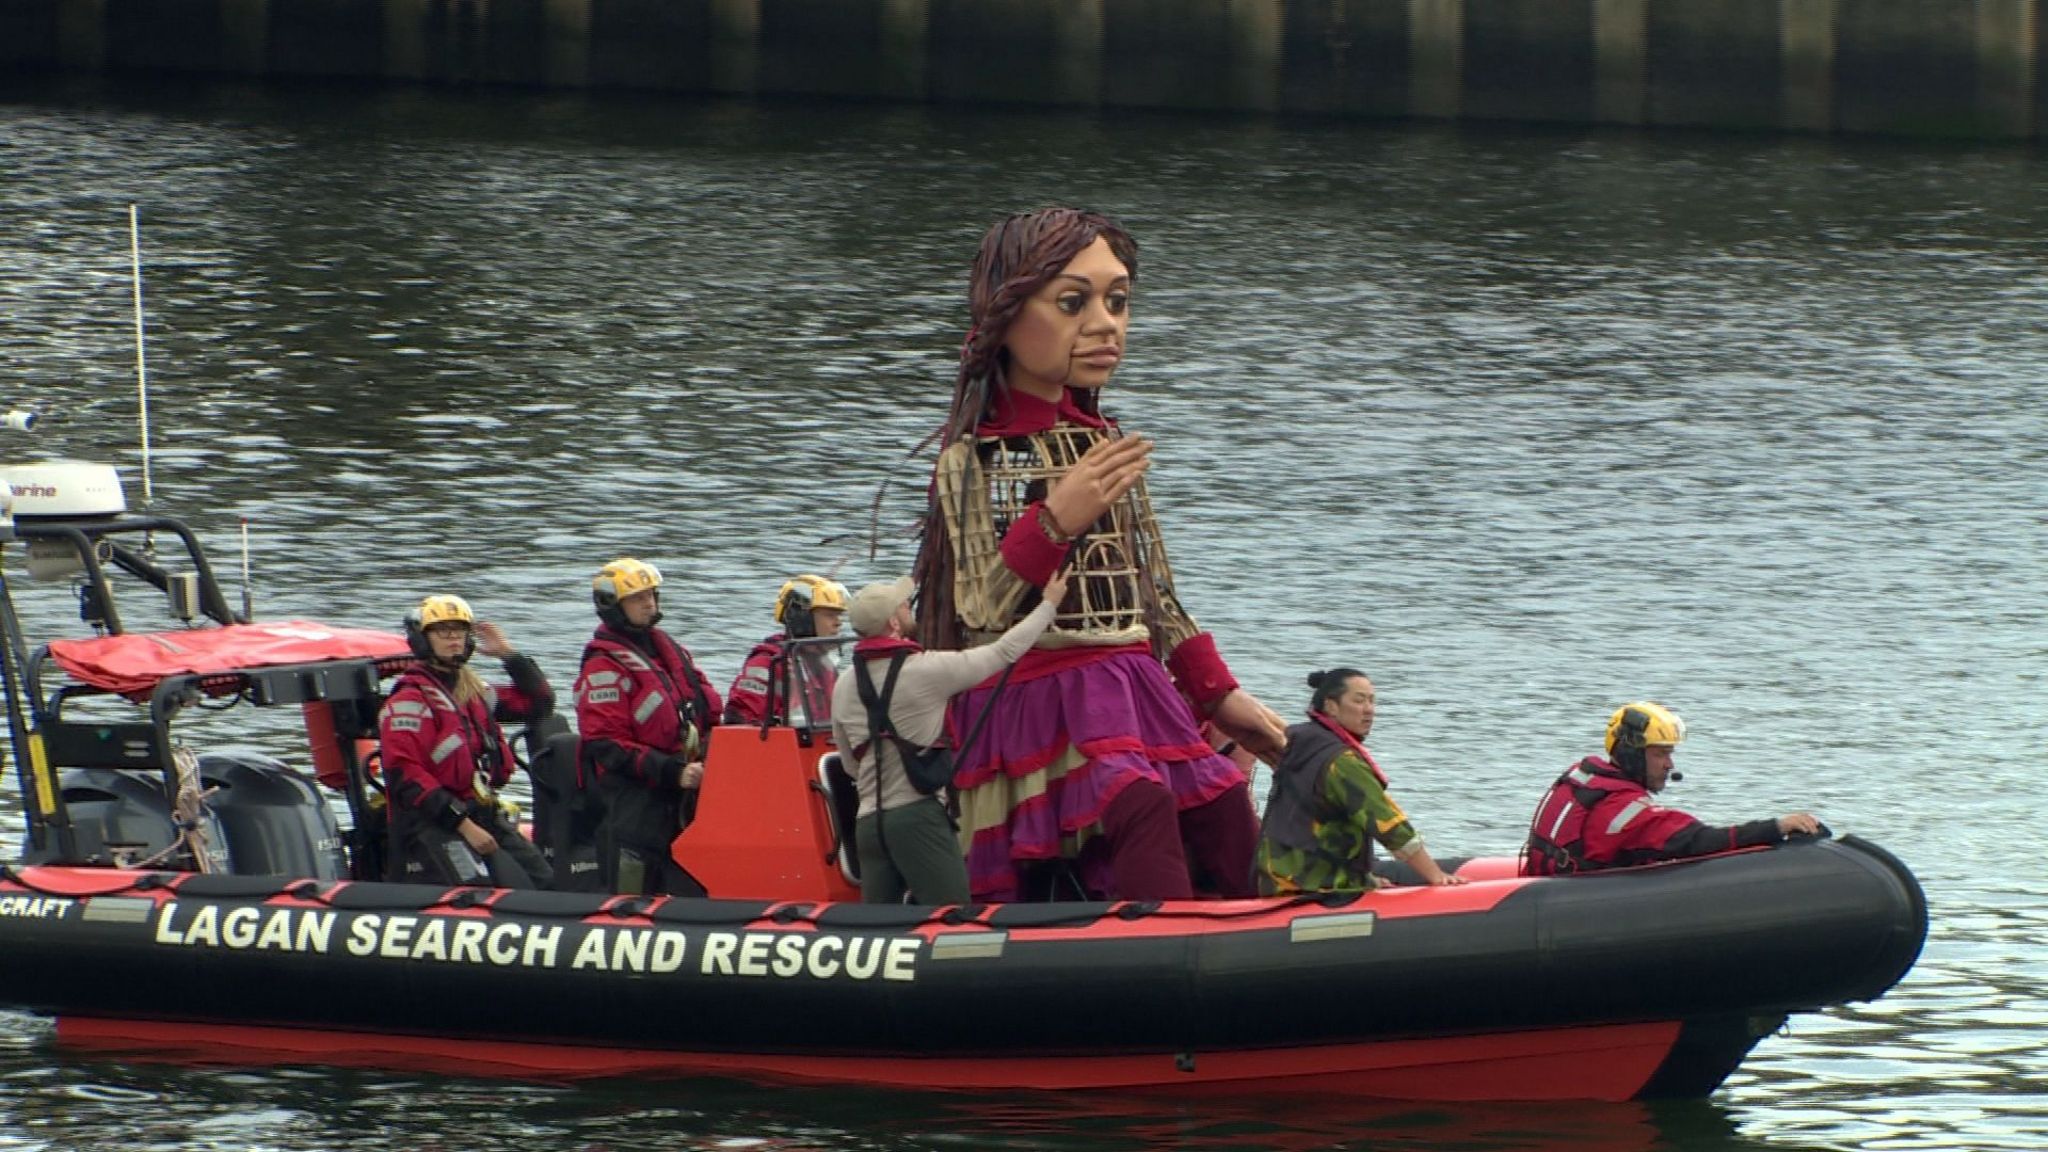 Little Amal on a Lagan Search and Rescue boat